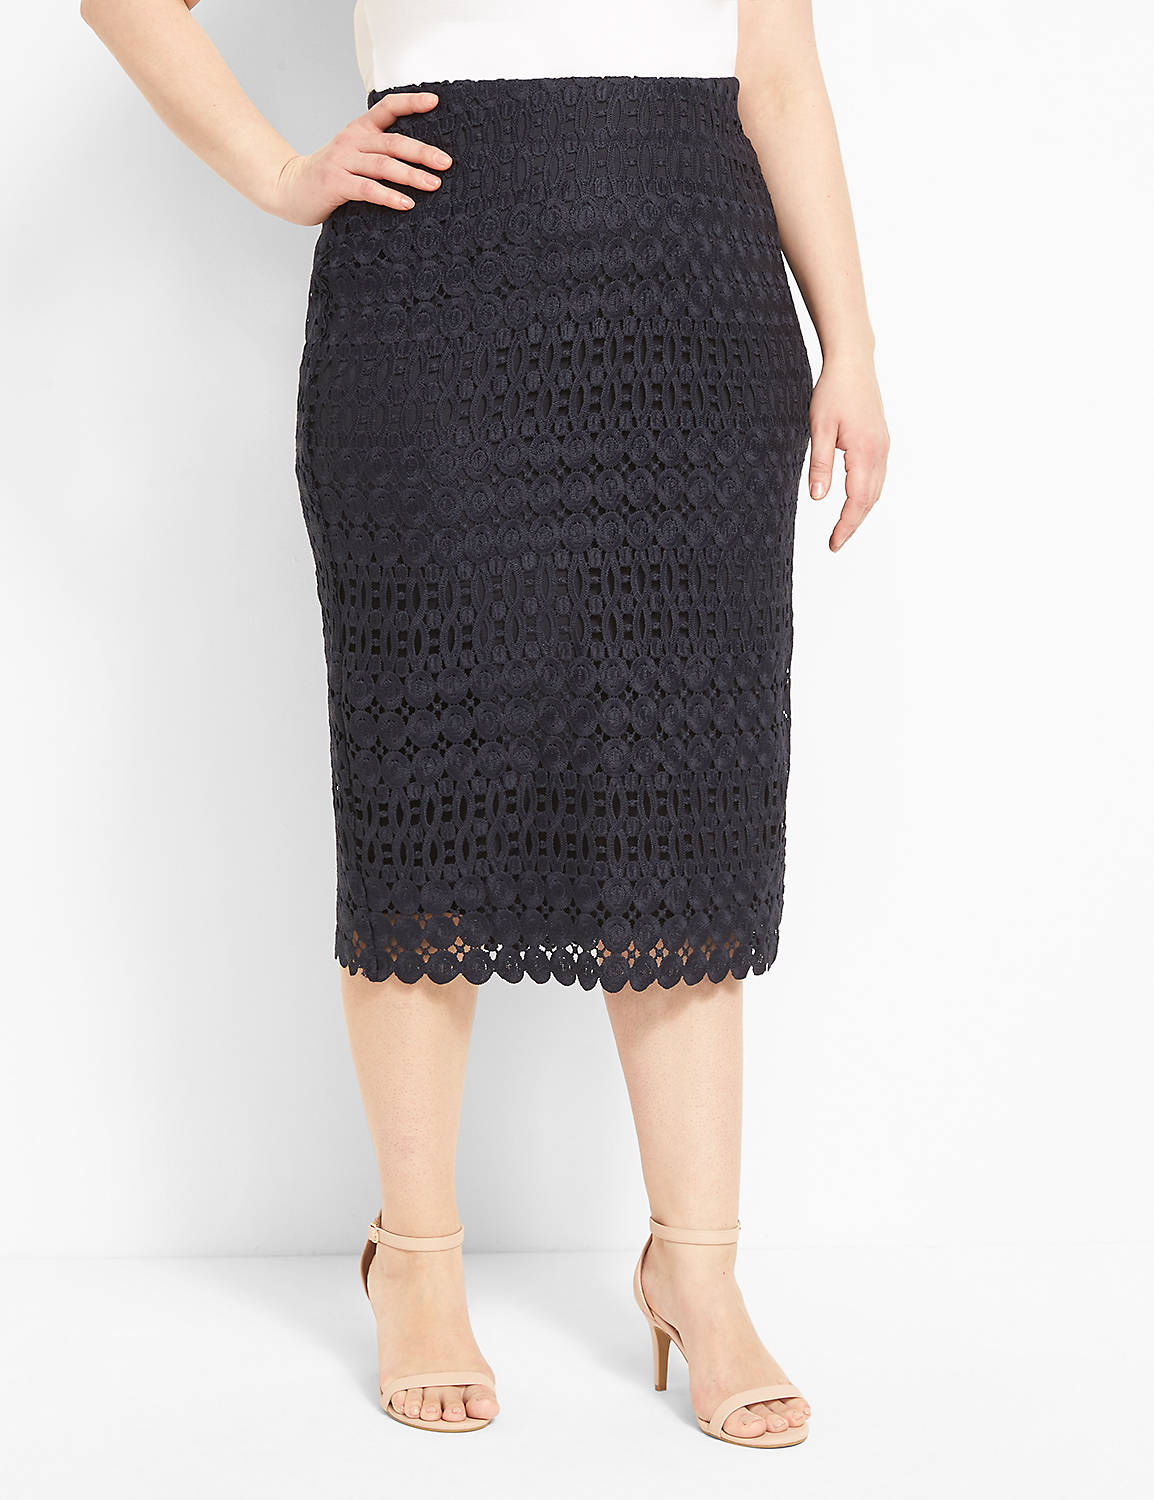 Lace Pencil Skirt 1127712 Product Image 1